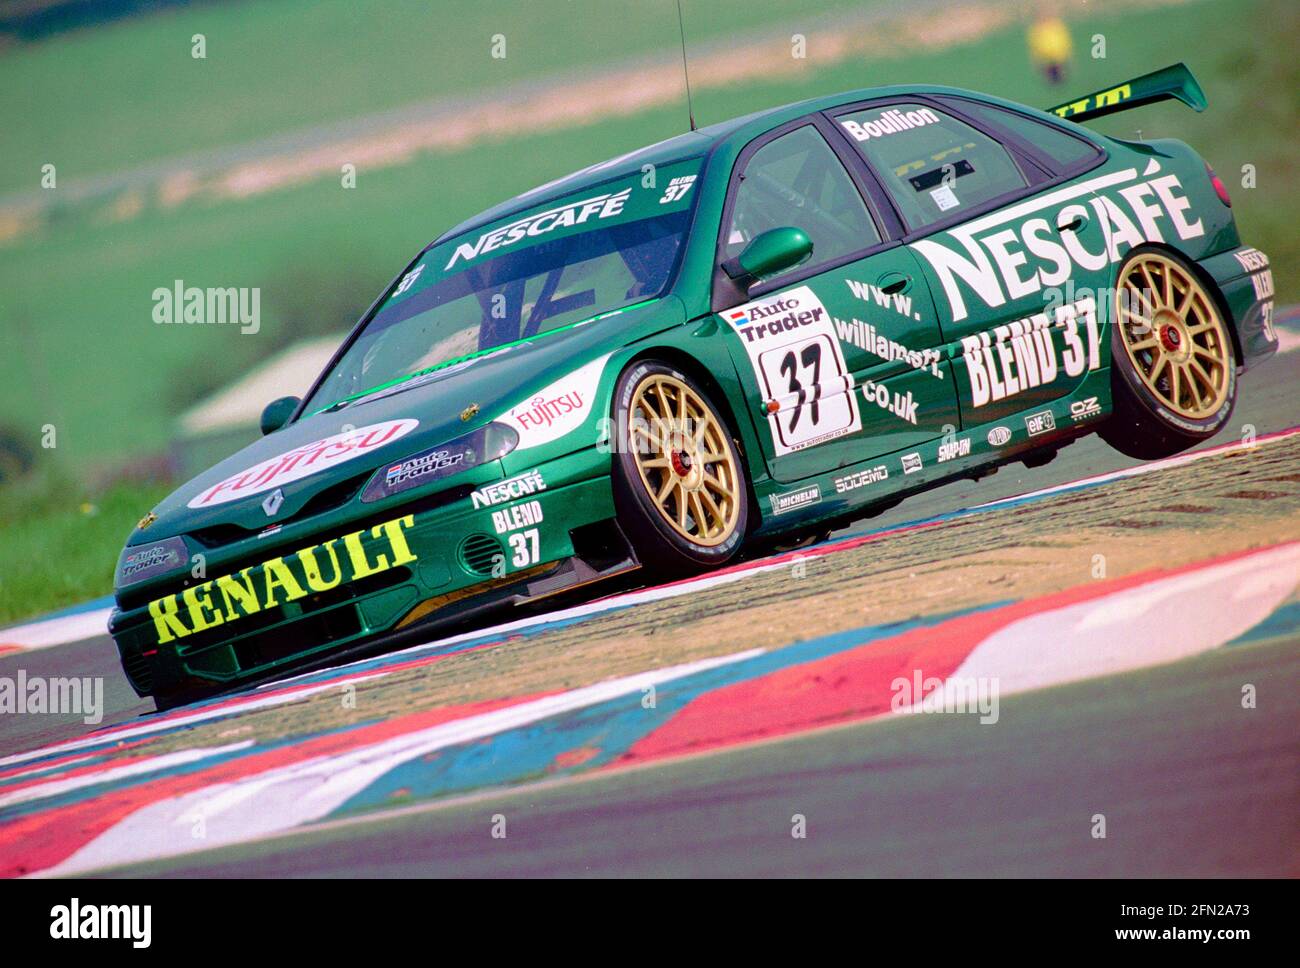 Jean-Christophe Boullion runs over the Club Chicane at Thruxton Circuit in the British Touring Car Championship in 1999 driving the Nescafe blend 37 Williams Renault. Stock Photo